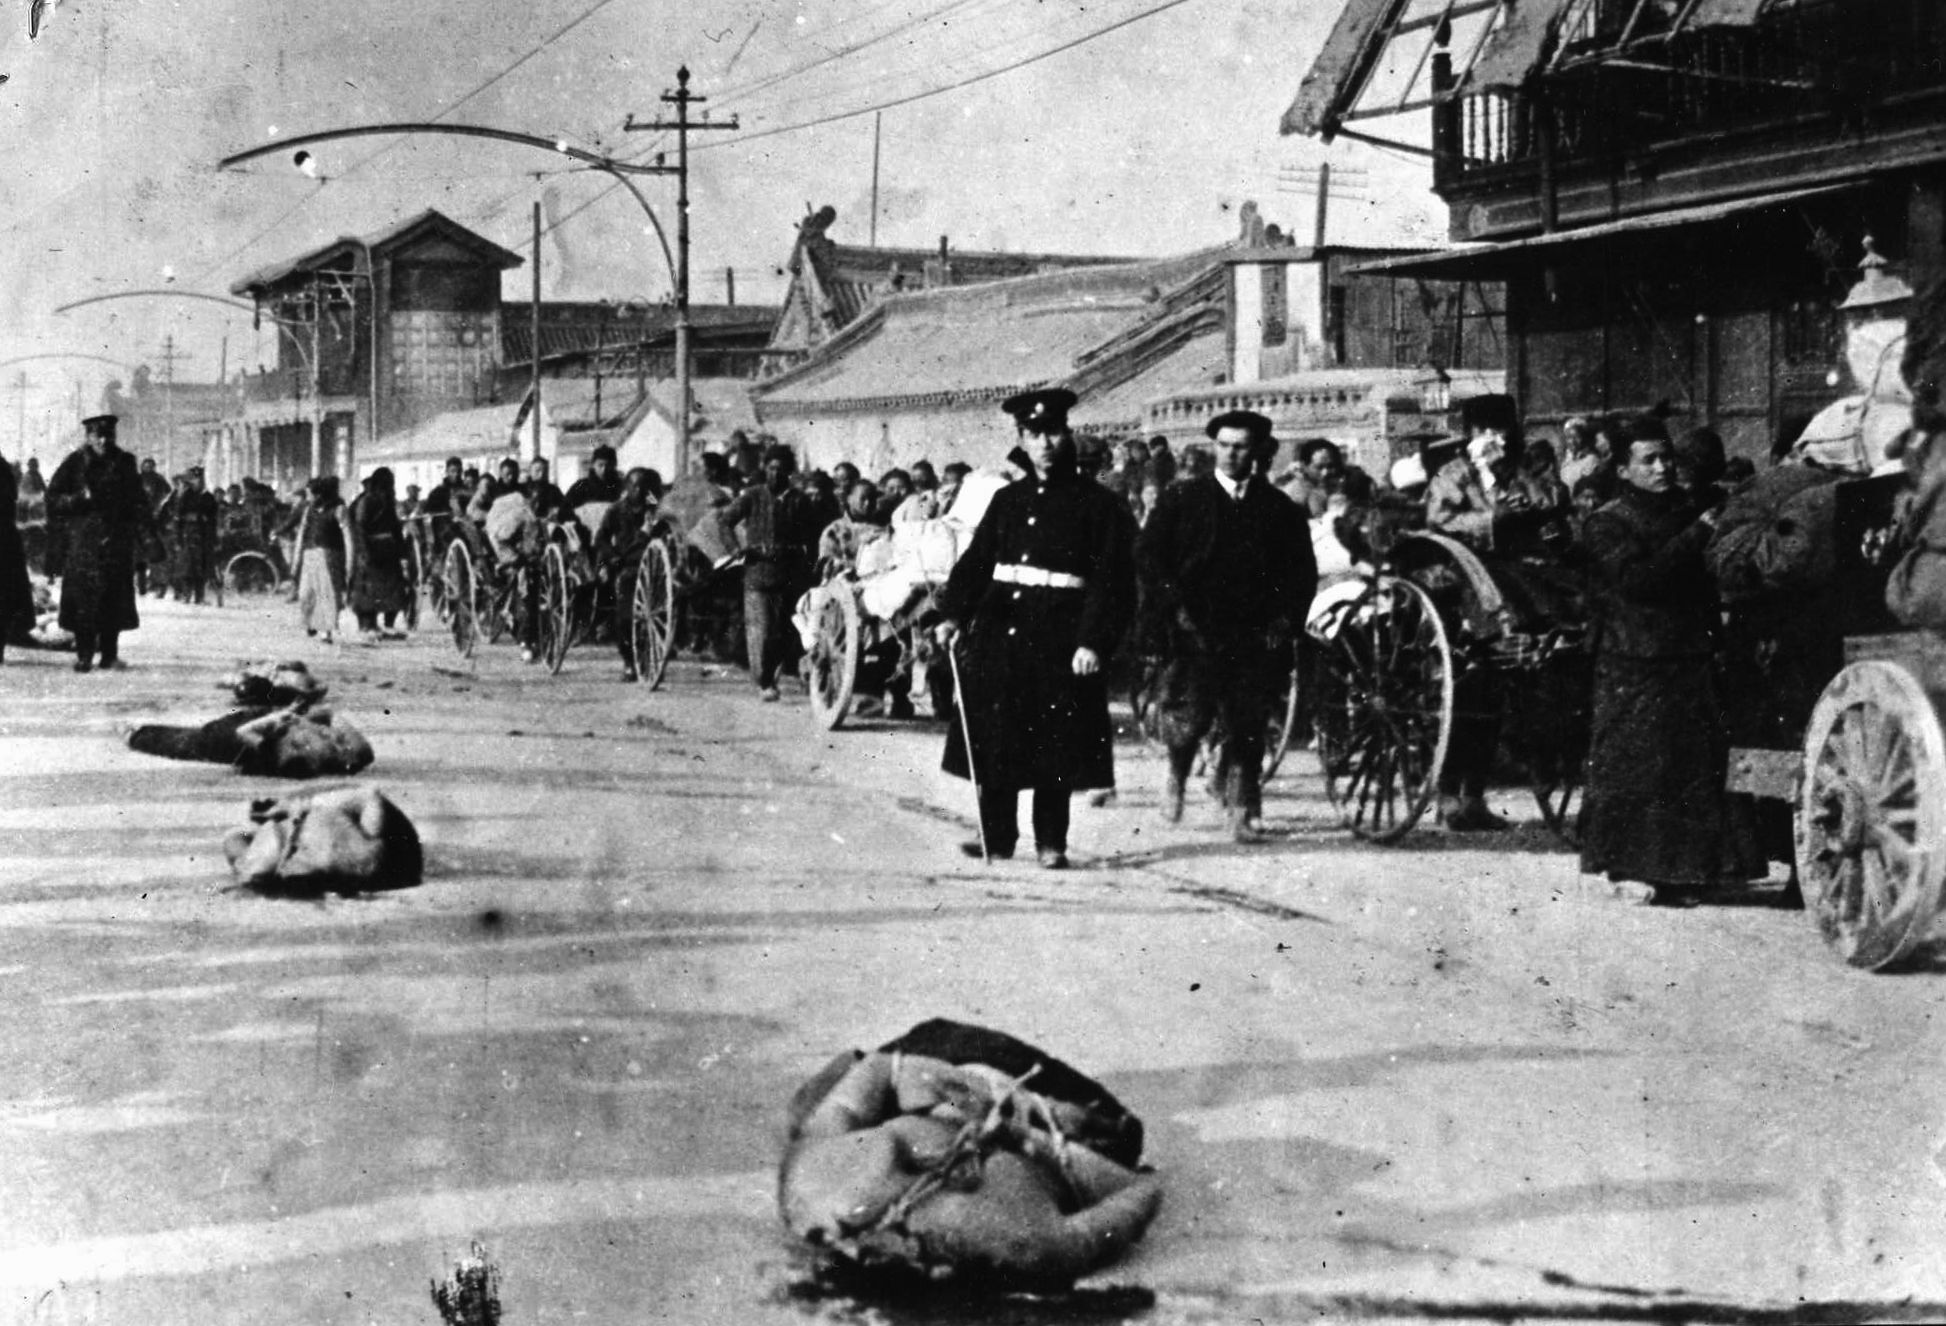 Left lying where they fell, Chinese victims of a Japanese execution lie bound and lifeless on a city street. The line of Chinese refugees fleeing the fighting seems hardly to take notice. (National Archives)